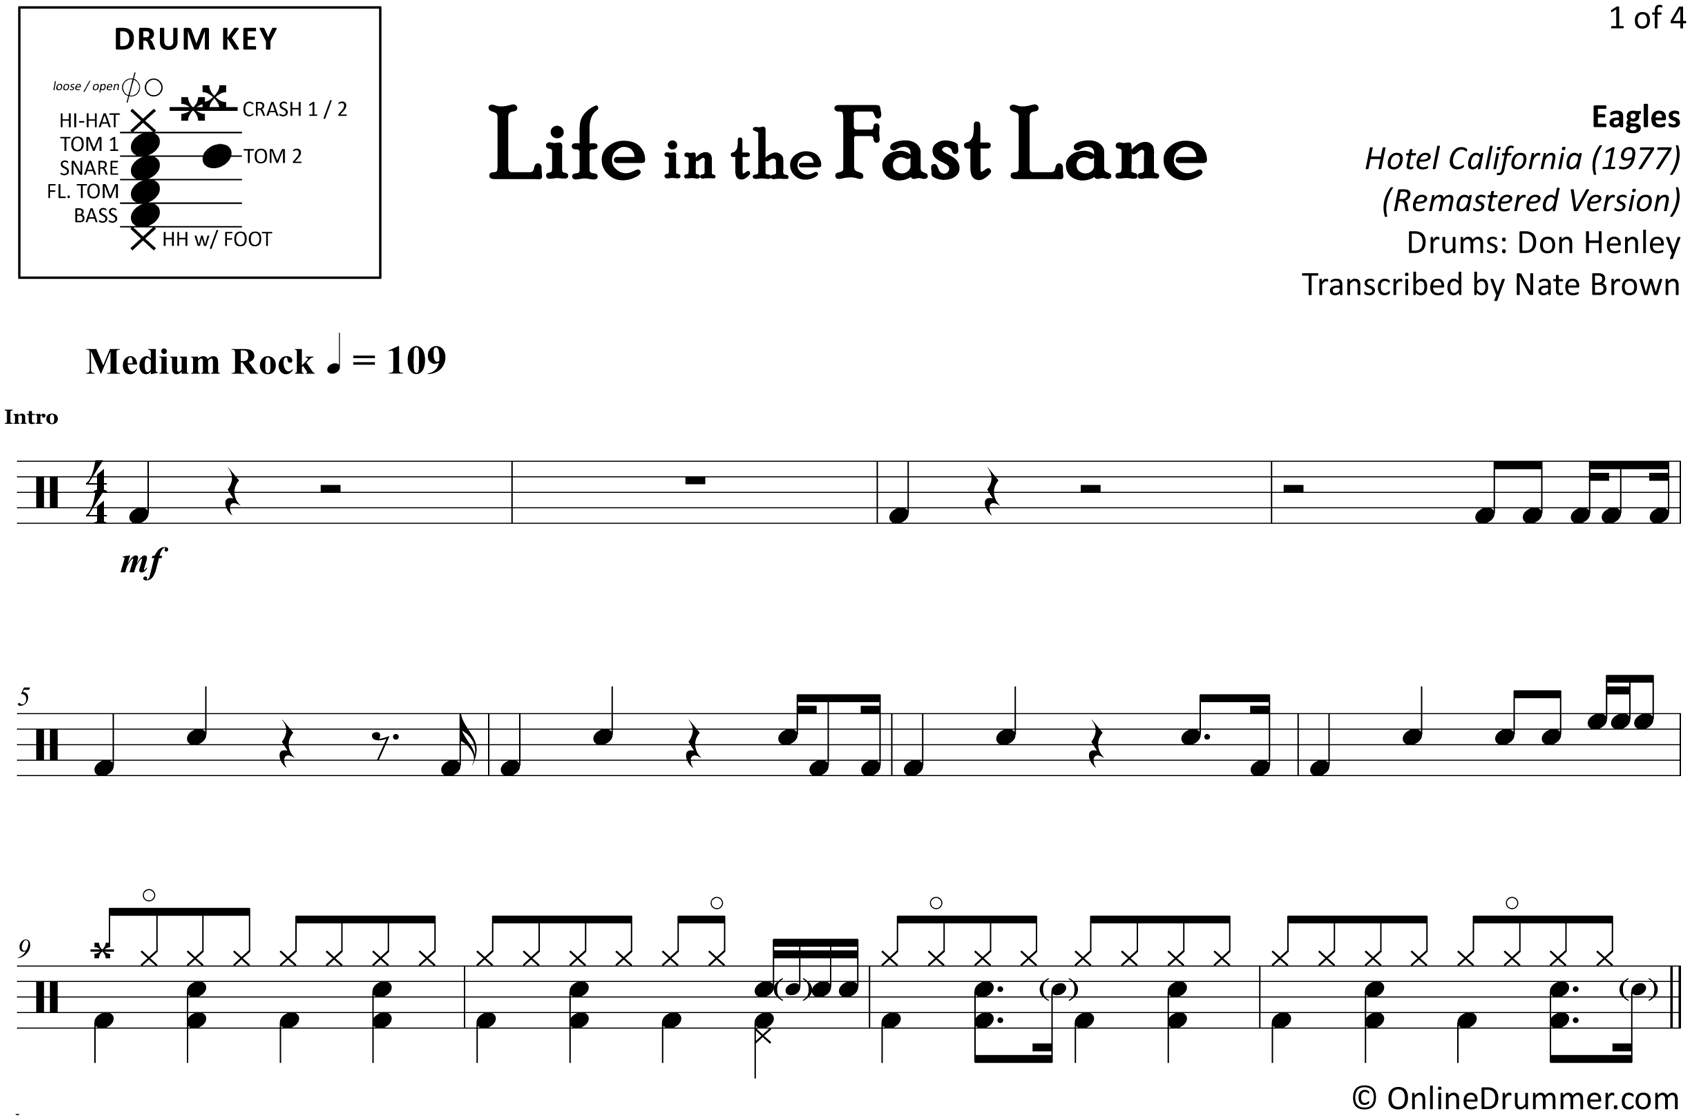 Life in the Fast Lane - Eagles - Drum Sheet Music